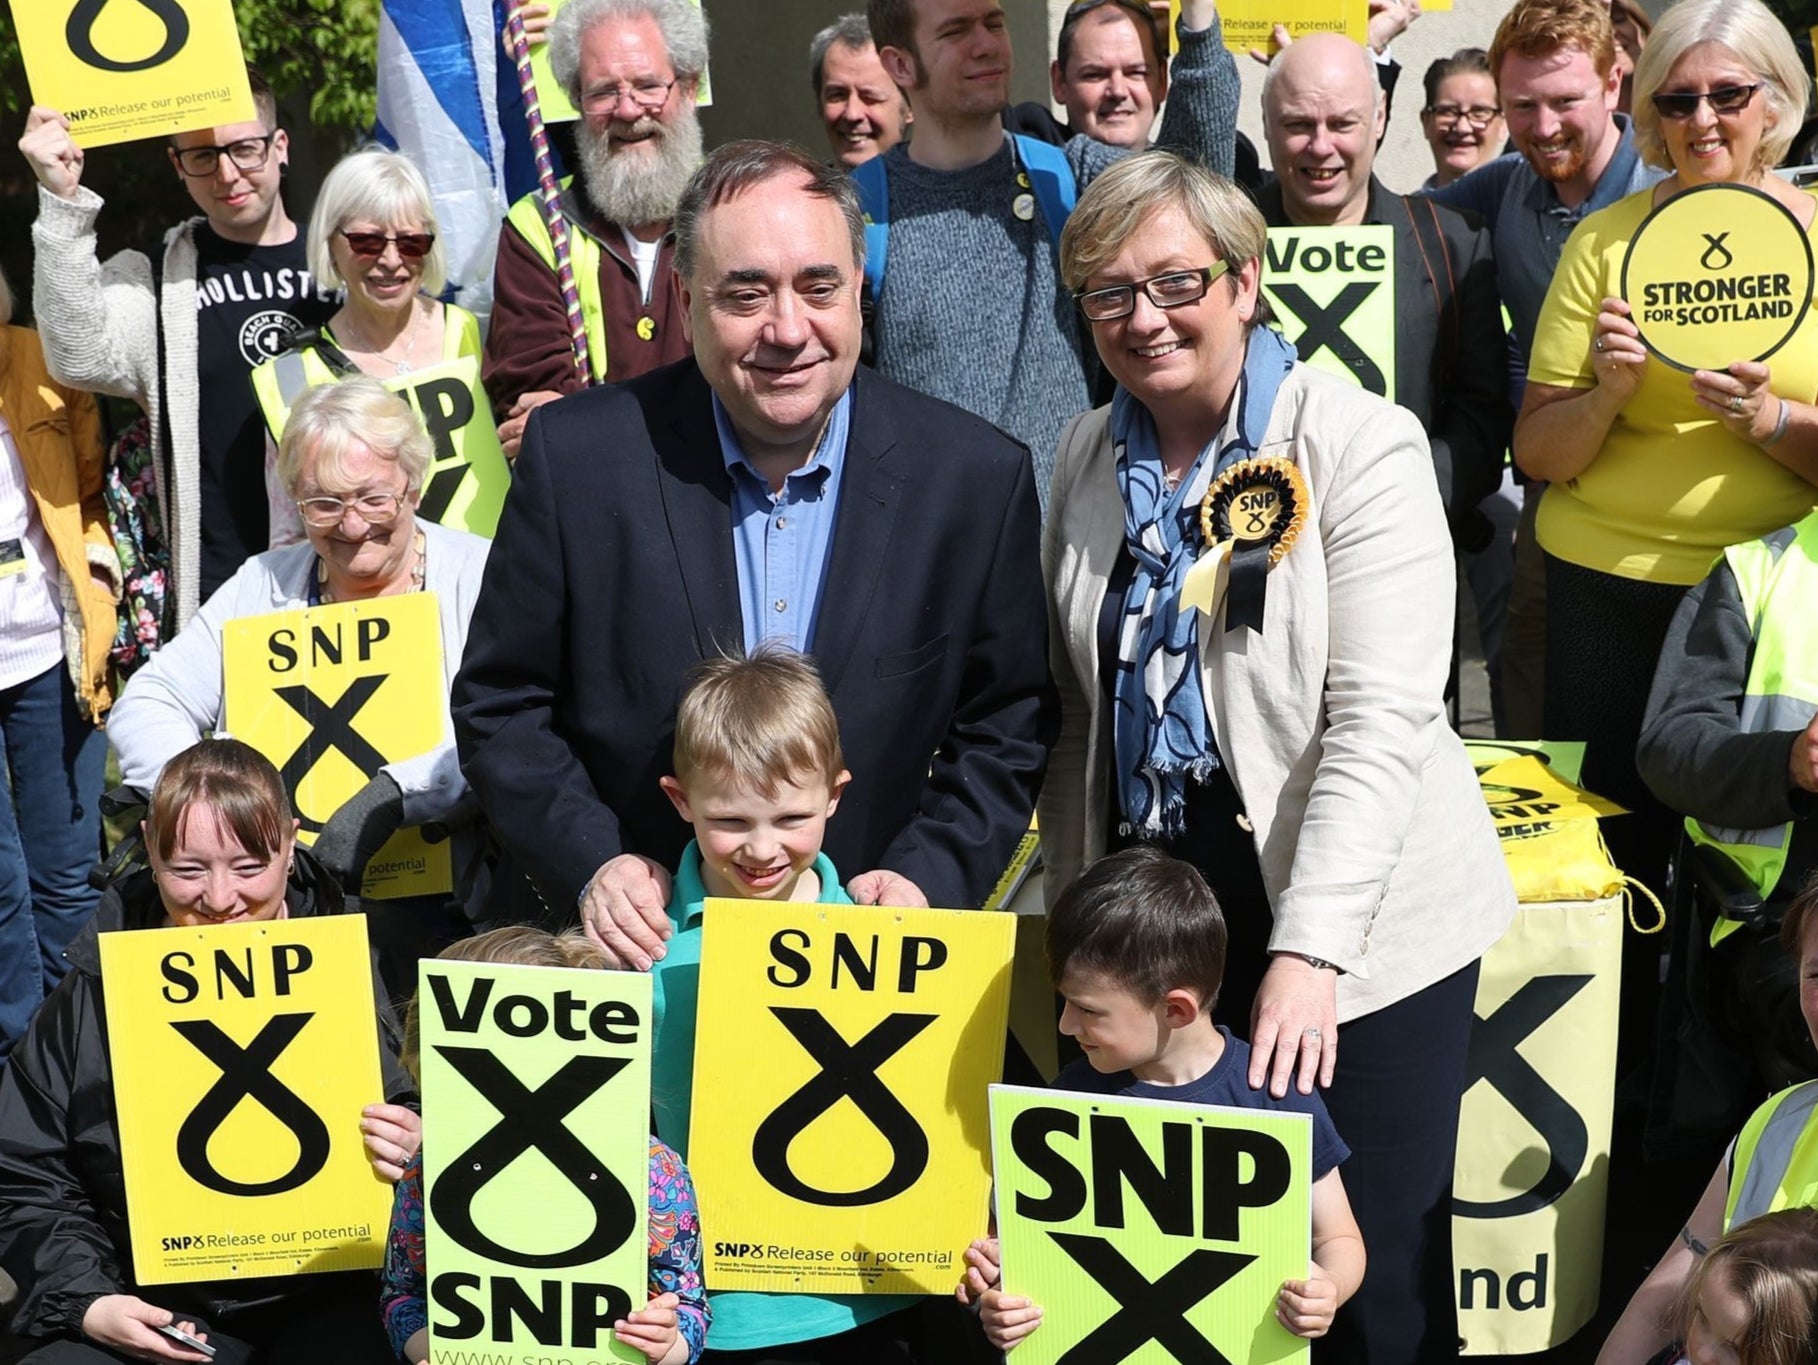 Alex Salmond and Joanna Cherry campaigning together in 2017